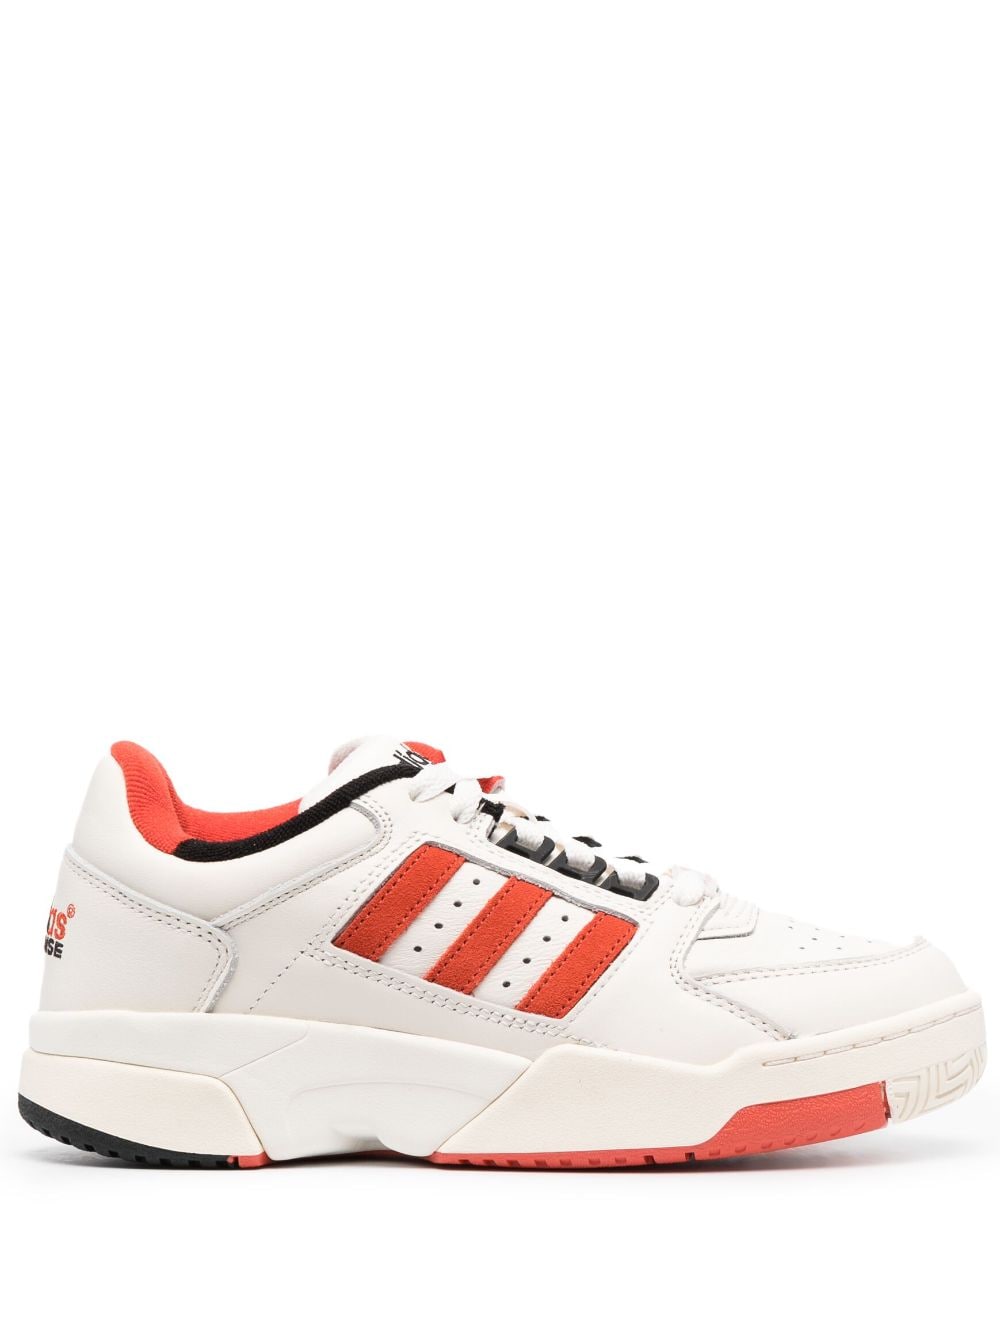 Image 1 of adidas Torsion Response low-top sneakers